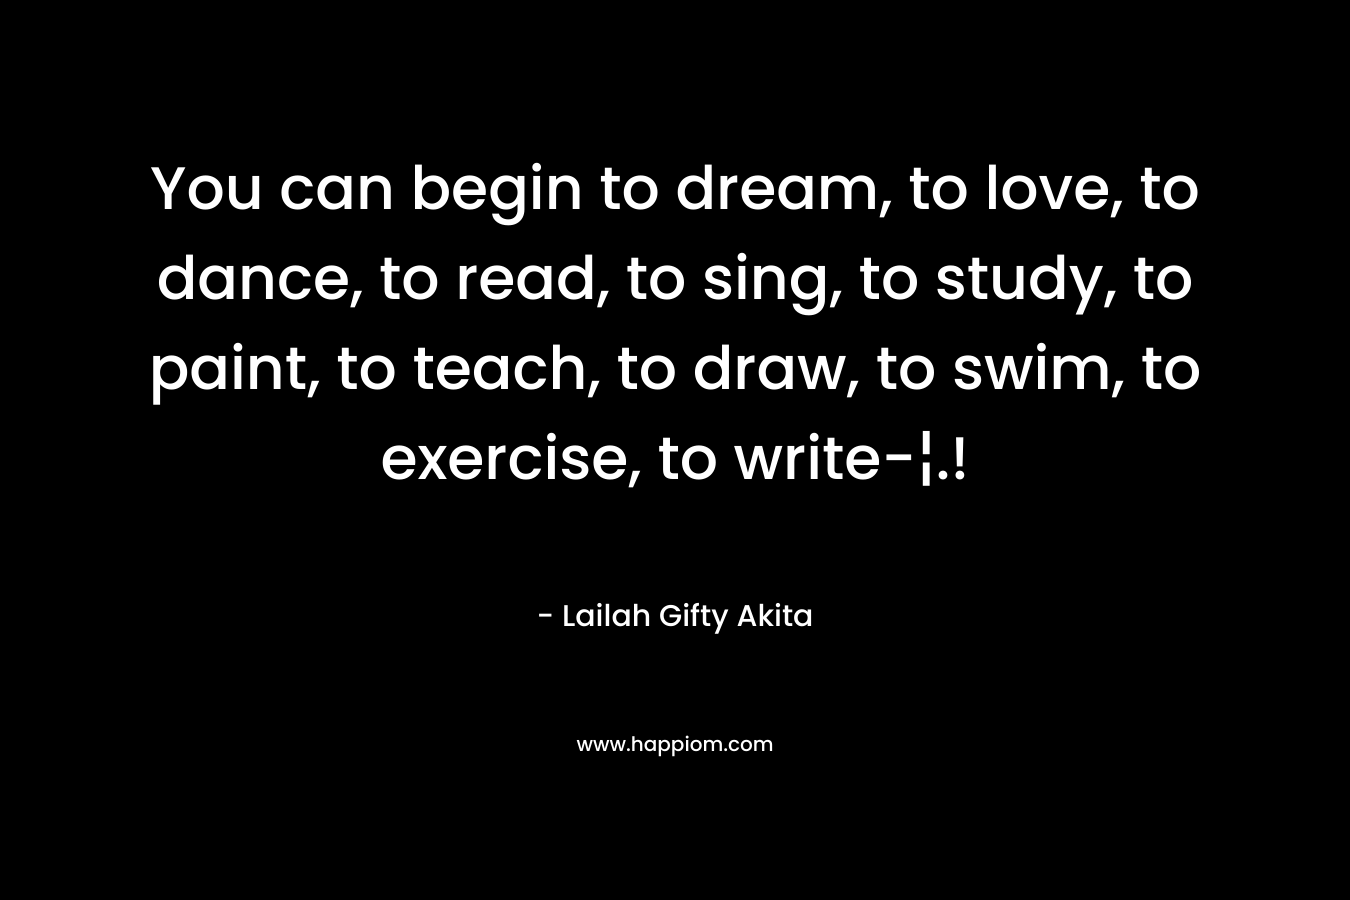 You can begin to dream, to love, to dance, to read, to sing, to study, to paint, to teach, to draw, to swim, to exercise, to write-¦.!